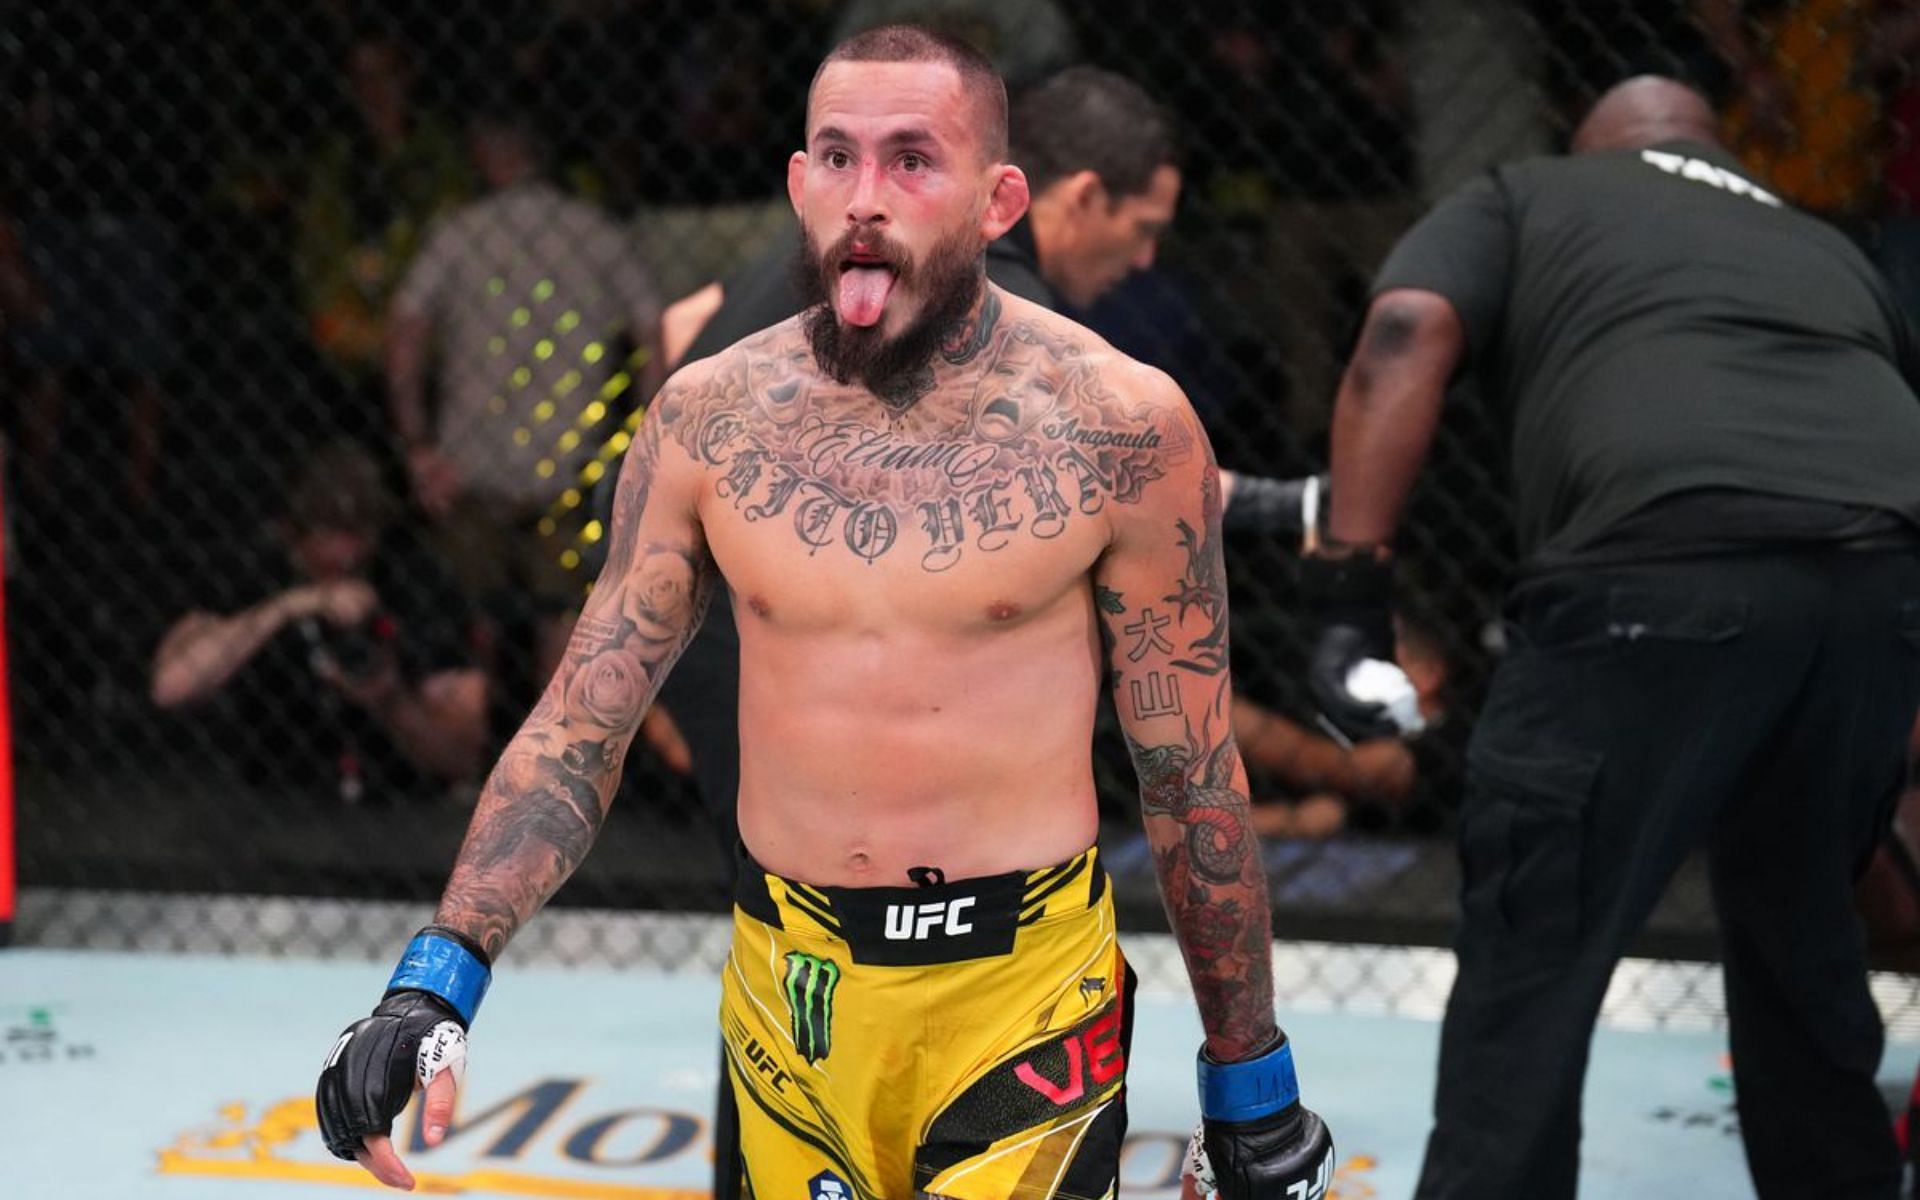 After his big win this weekend over Rob Font, who is next for Marlon Vera?